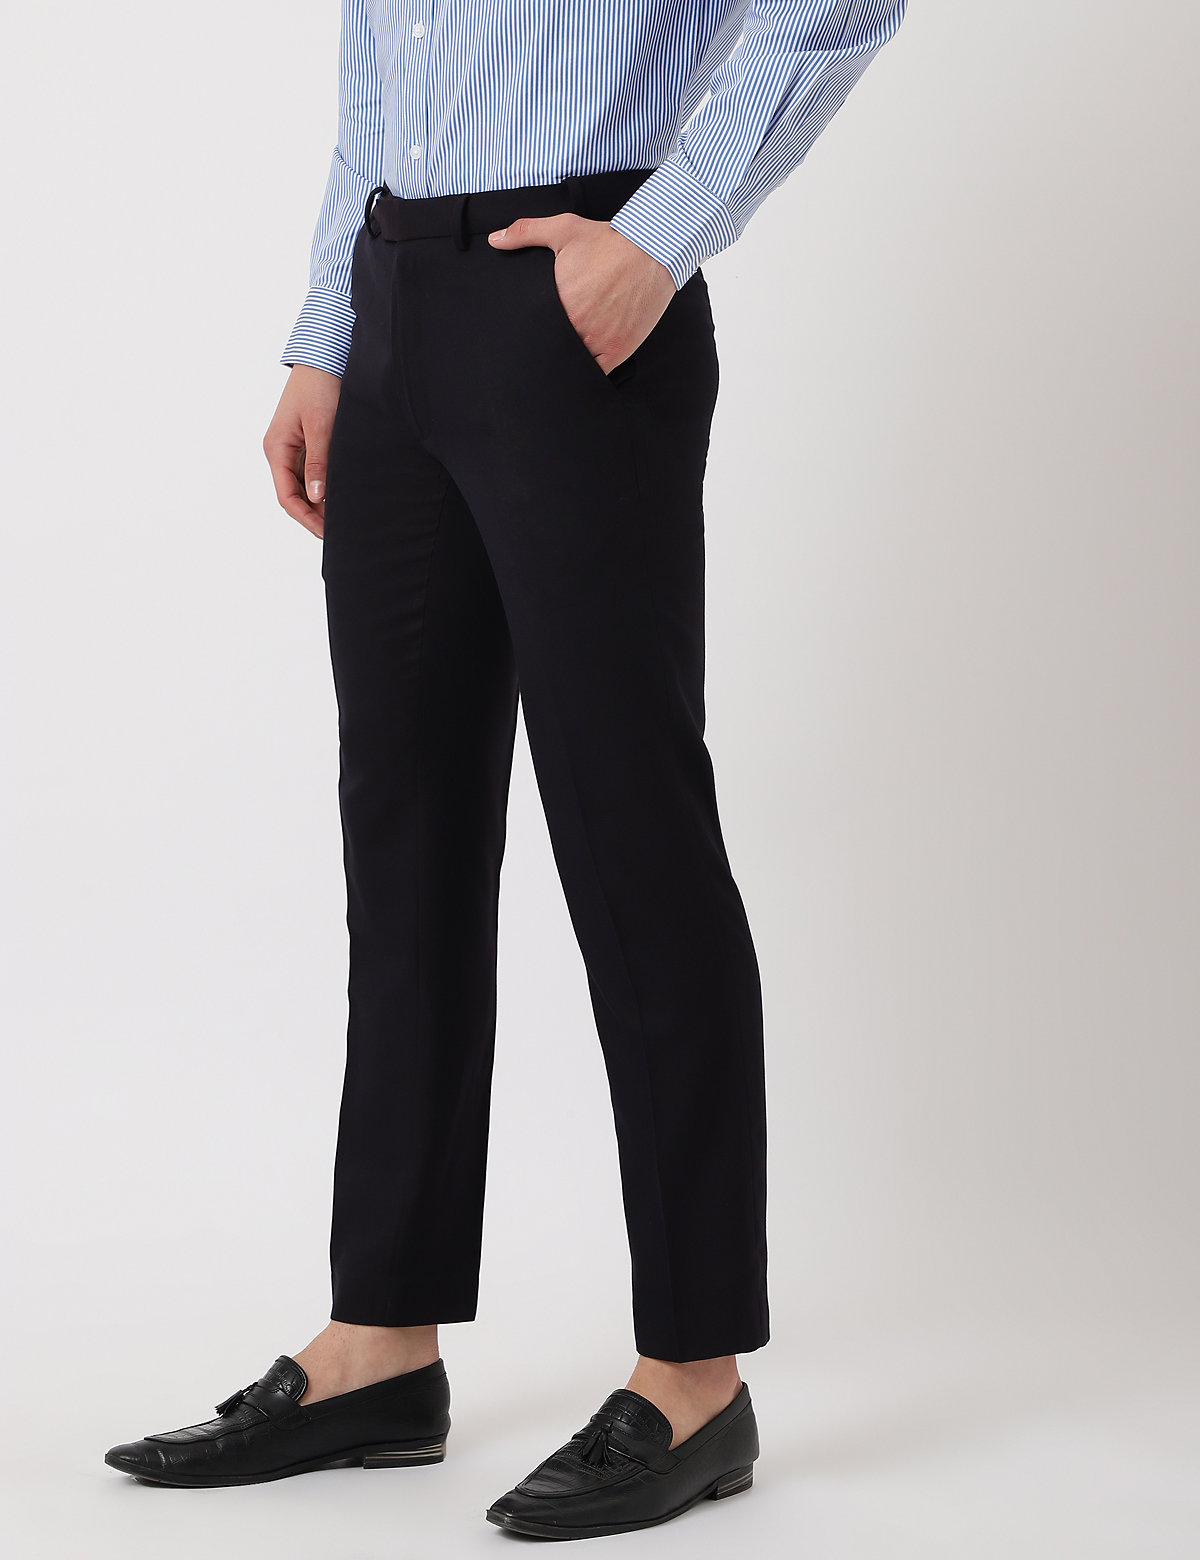 Poly Mix Textured Slim Fit Trouser